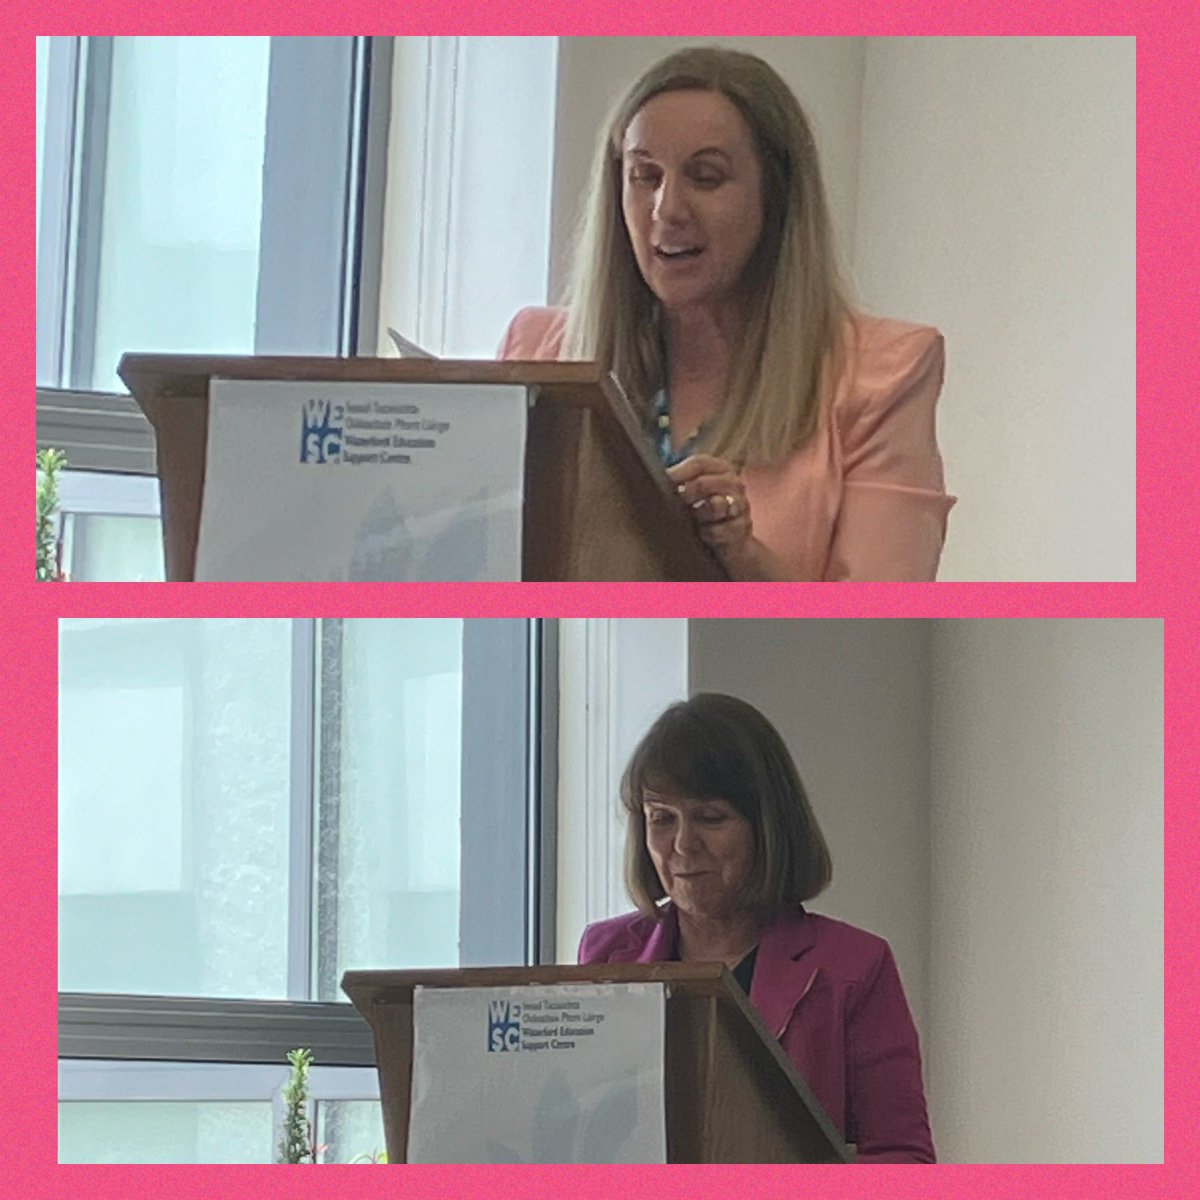 A great celebration of the work of Waterford Education Support Centre at their 50th Anniversary yesterday! Well done to Director Assumpta O’Neill, Breda, Anna Marie & all! @way_leadthe @ESCItweets @IPPN_Education @network_will